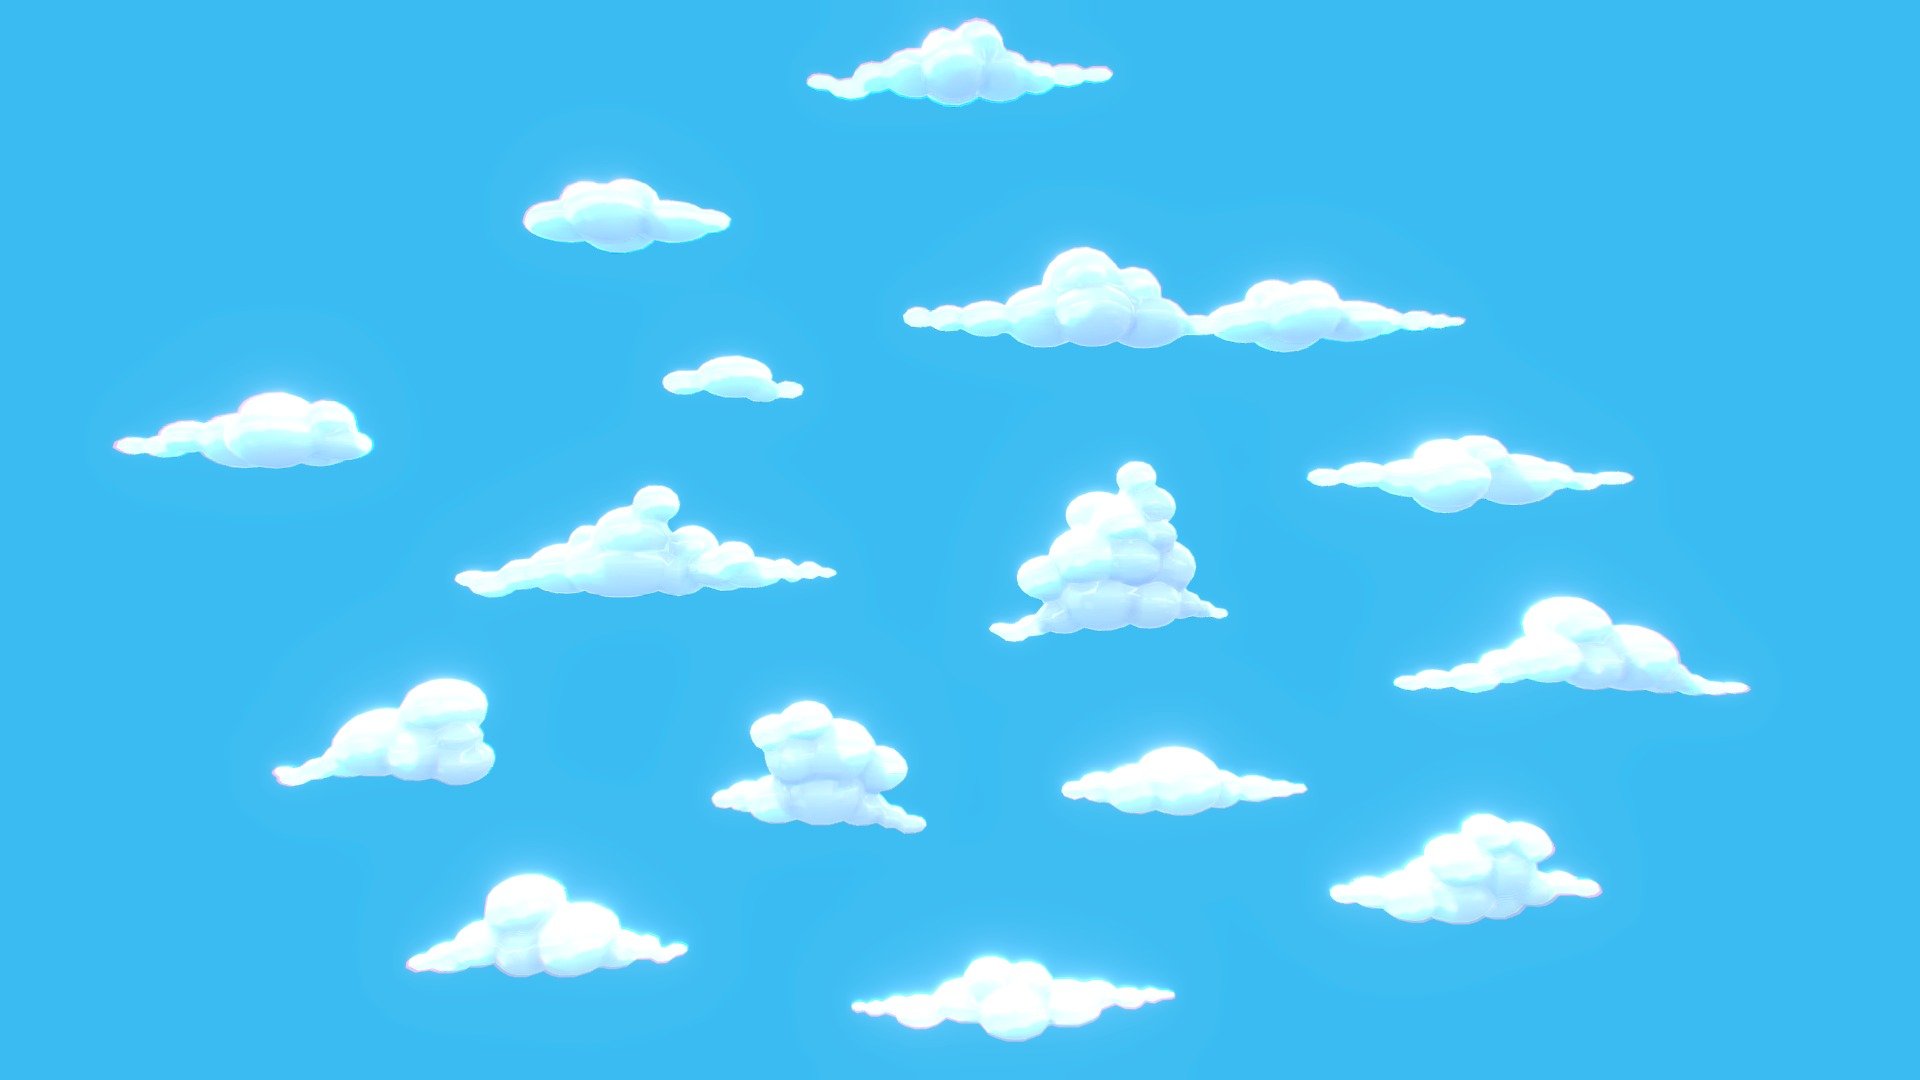 15 clouds with lovely cartoon style for you to freely arrange creatively. Suitable for game, animation, photo projects…

Package includes:

-1 FBX file 15k Tris

-With UV, No texture



Clouds cartoon lowpoly - Pack 01: https://sketchfab.com/3d-models/clouds-cartoon-lowpoly-pack-01-354fe9b9eecc48a398d26d69627be41b


Contact me for support. Hope to receive feedback from everyone. Thank - Clouds cartoon lowoly - Pack 02 - Buy Royalty Free 3D model by DuNguyn - Assets store (@nguyenvuduc2000) 3d model